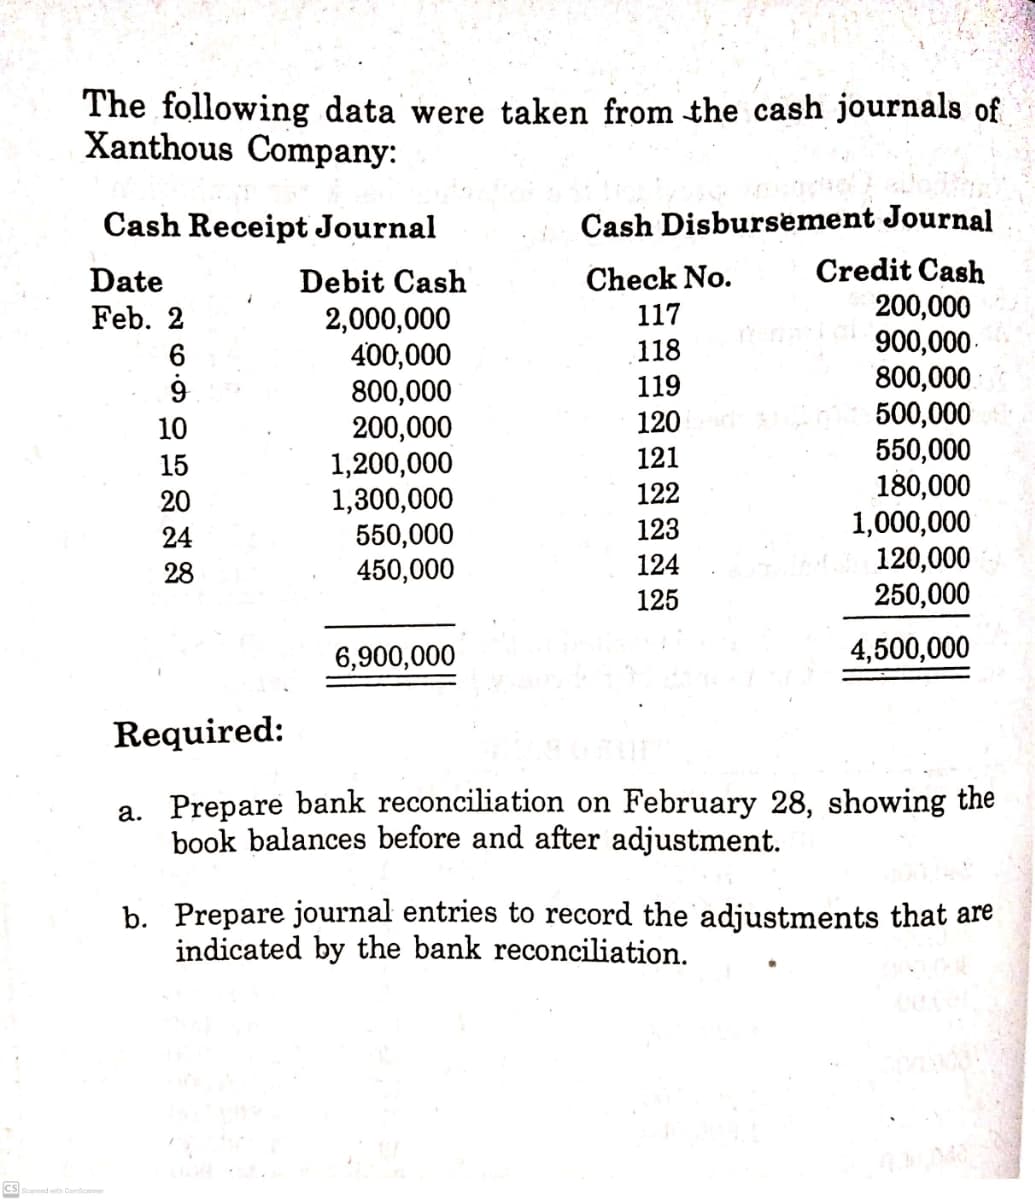 The following data were taken from the cash journals of
Xanthous Company:
Cash Receipt Journal
Cash Disbursement Journal
Credit Cash
200,000
900,000-
800,000
500,000
550,000
180,000
1,000,000
120,000
250,000
Date
Debit Cash
Check No.
Feb. 2
117
2,000,000
400,000
800,000
200,000
1,200,000
1,300,000
550,000
450,000
6
118
119
10
120
15
121
20
122
24
123
28
124
125
6,900,000
4,500,000
Required:
a. Prepare bank reconciliation on February 28, showing the
book balances before and after adjustment.
b. Prepare journal entries to record the adjustments that are
indicated by the bank reconciliation.
CS
